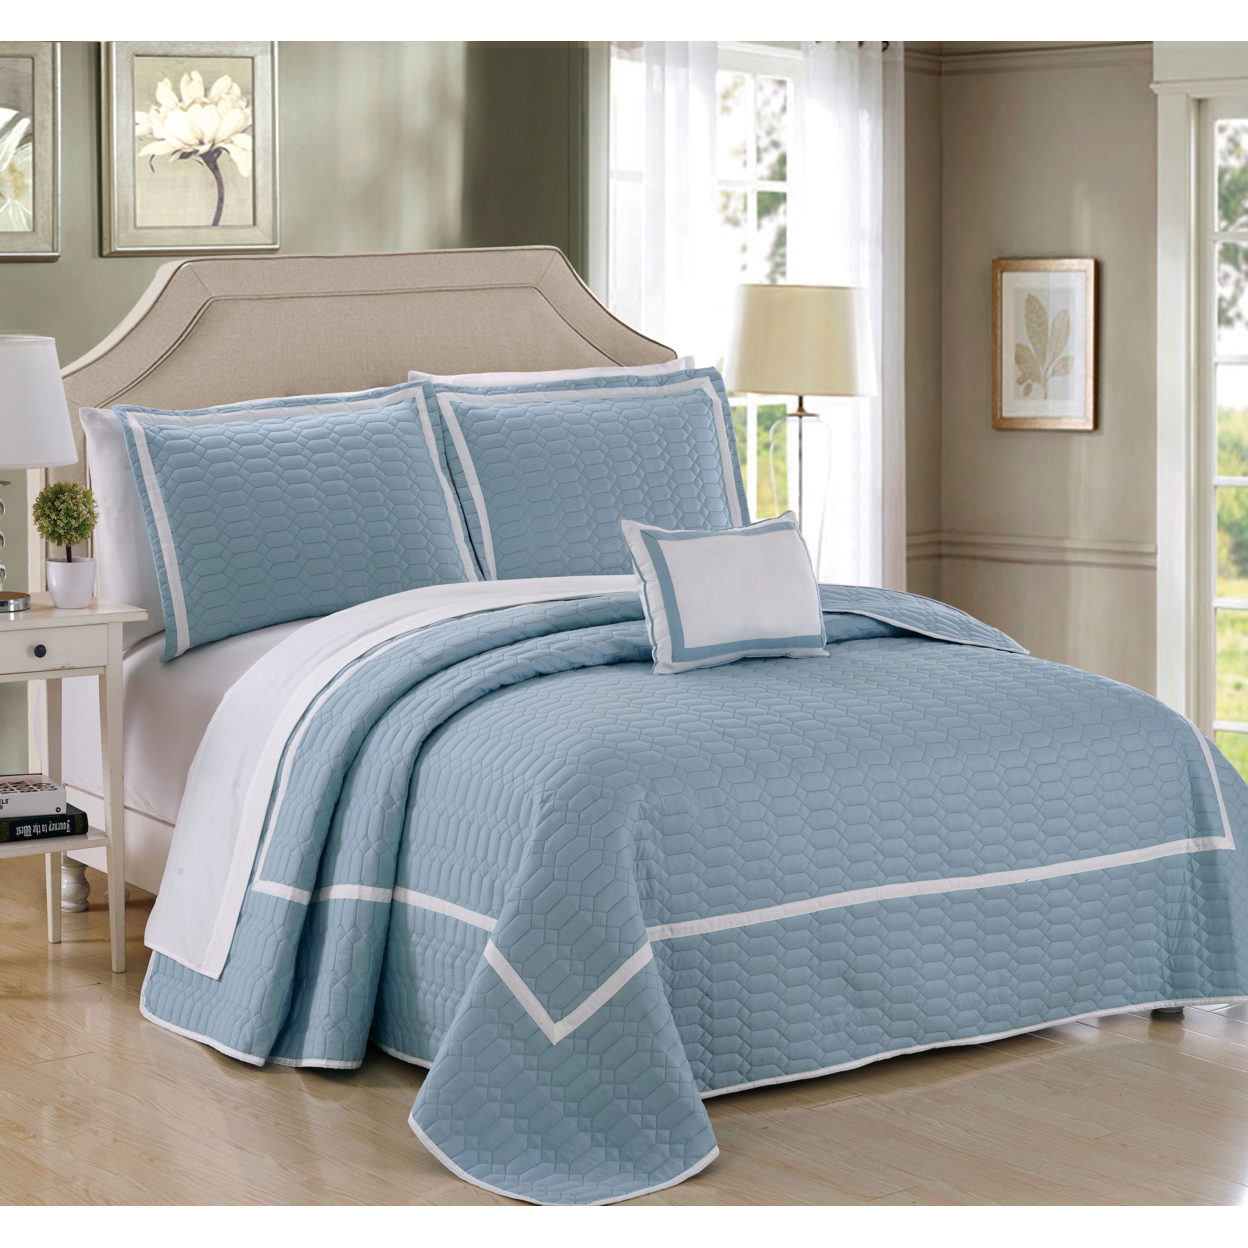 8 Pc. Neal Hotel Collection 2 Tone Banded Geometrical Embroidered, Quilt In A Bag, Includes Sheets Set, Shams & Decorative Pillows - Blue, Q